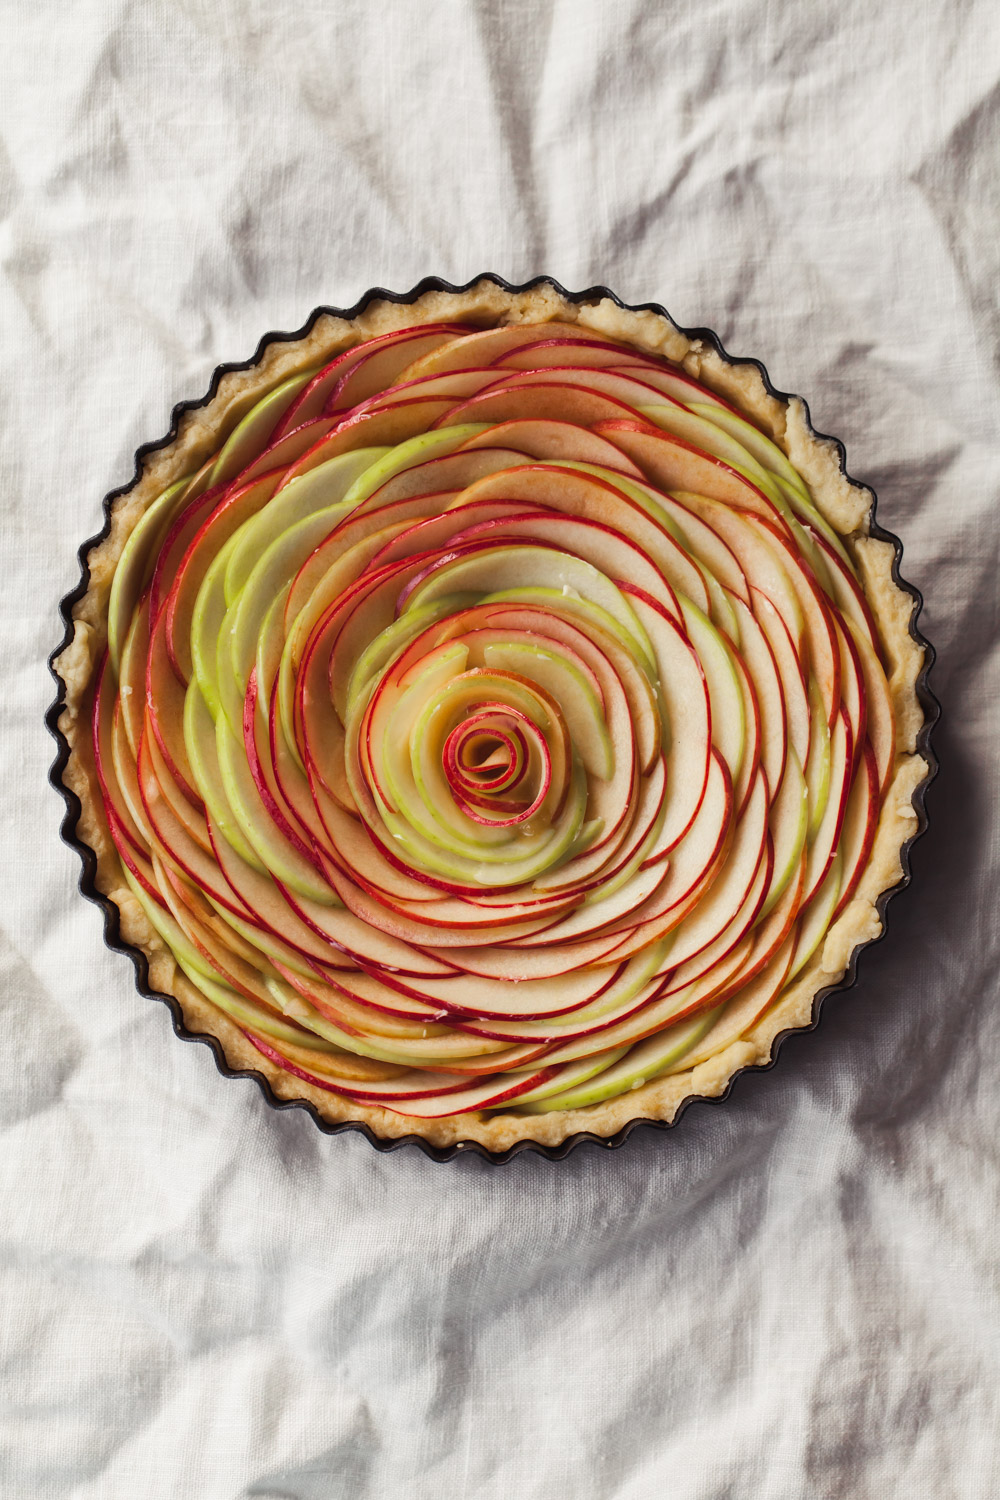 Apple slices are fanned in an unbaked tart to form a rose.